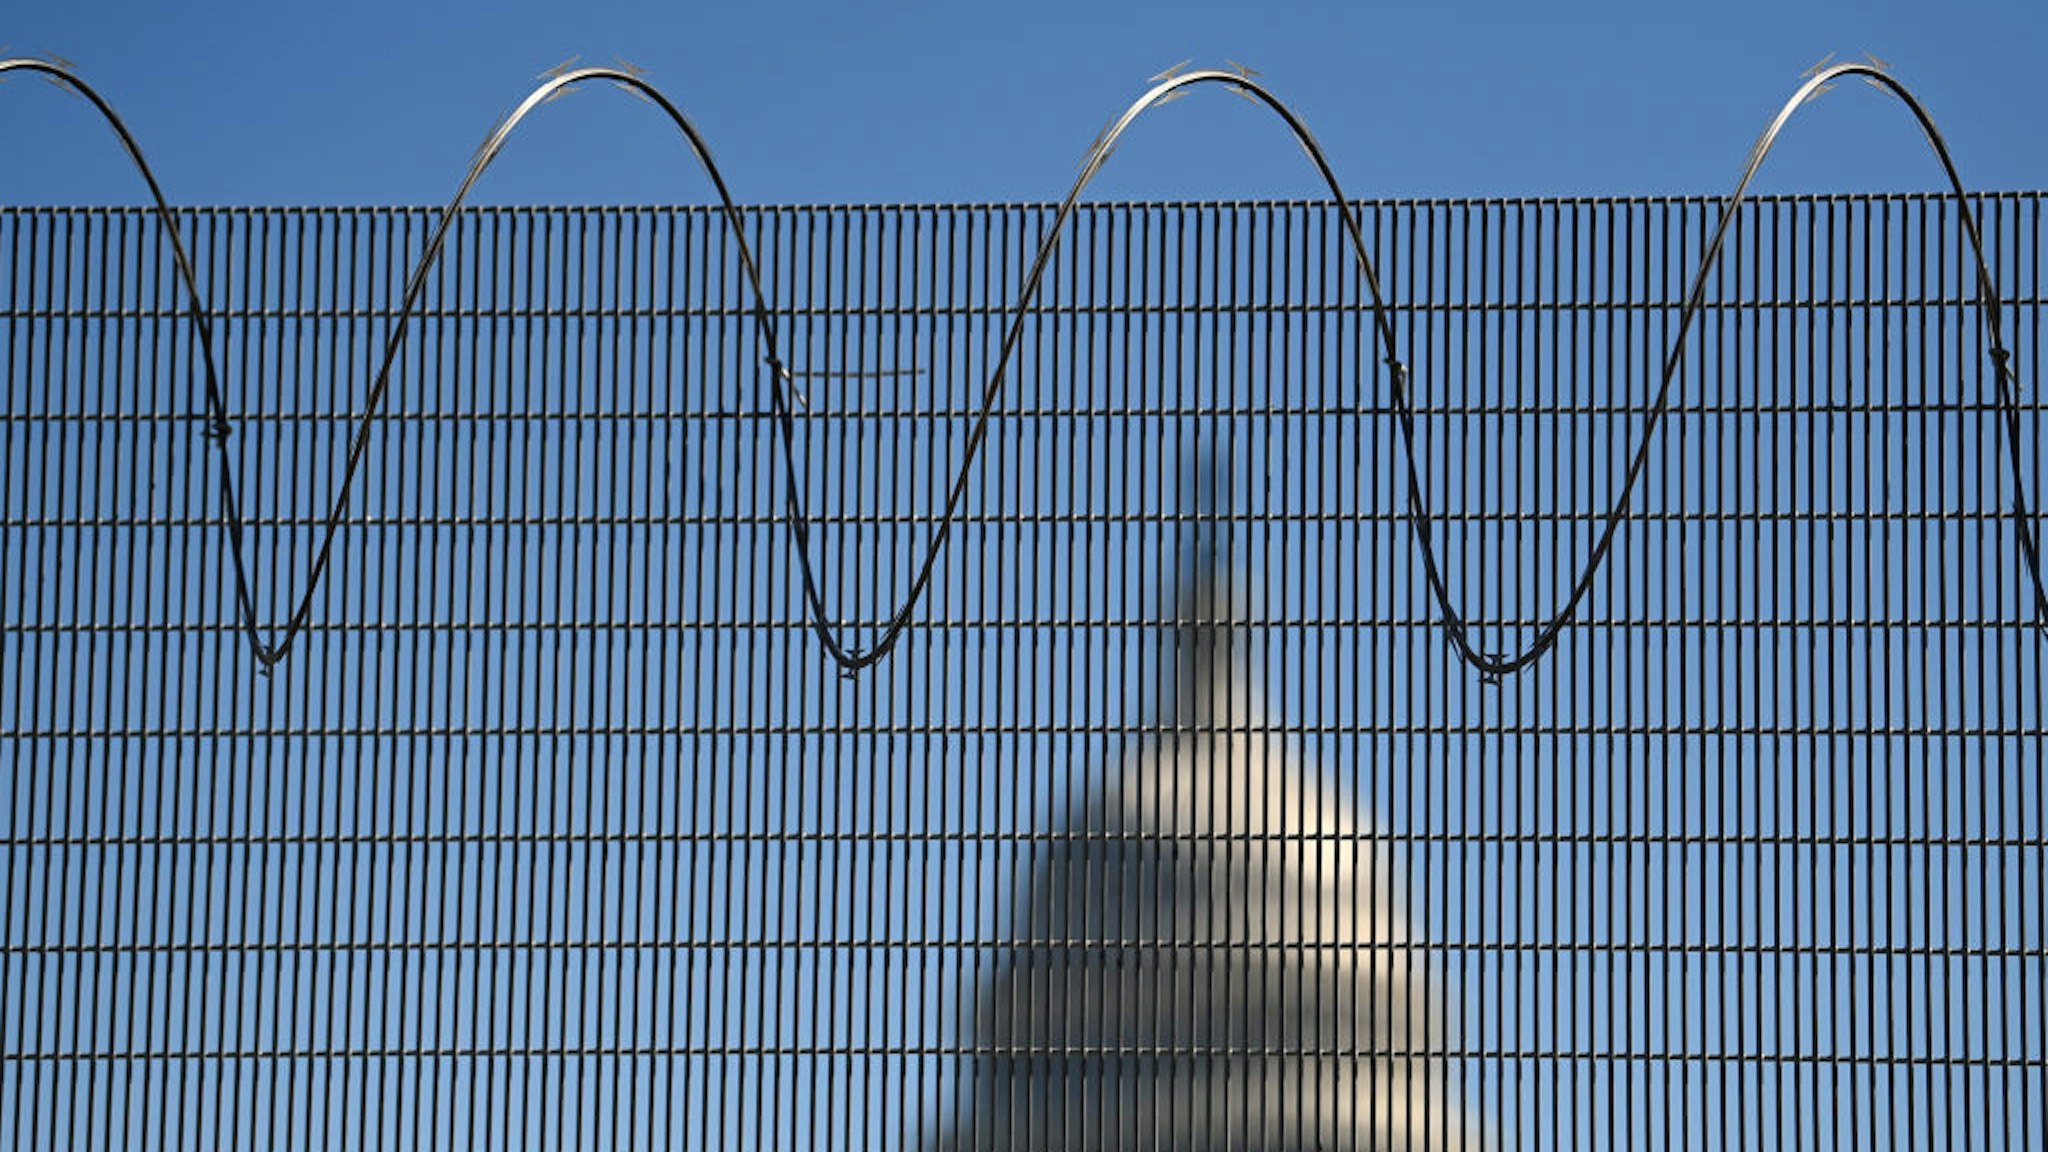 WASHINGTON, DC - FEBRUARY 25: Fencing that surrounds the United States Capitol is seen on Thursday February 25, 2021 in Washington, DC. The fencing went up following the riot at the Capitol on January 6th by a pro-Trump mob. (Photo by Matt McClain/The Washington Post via Getty Images)